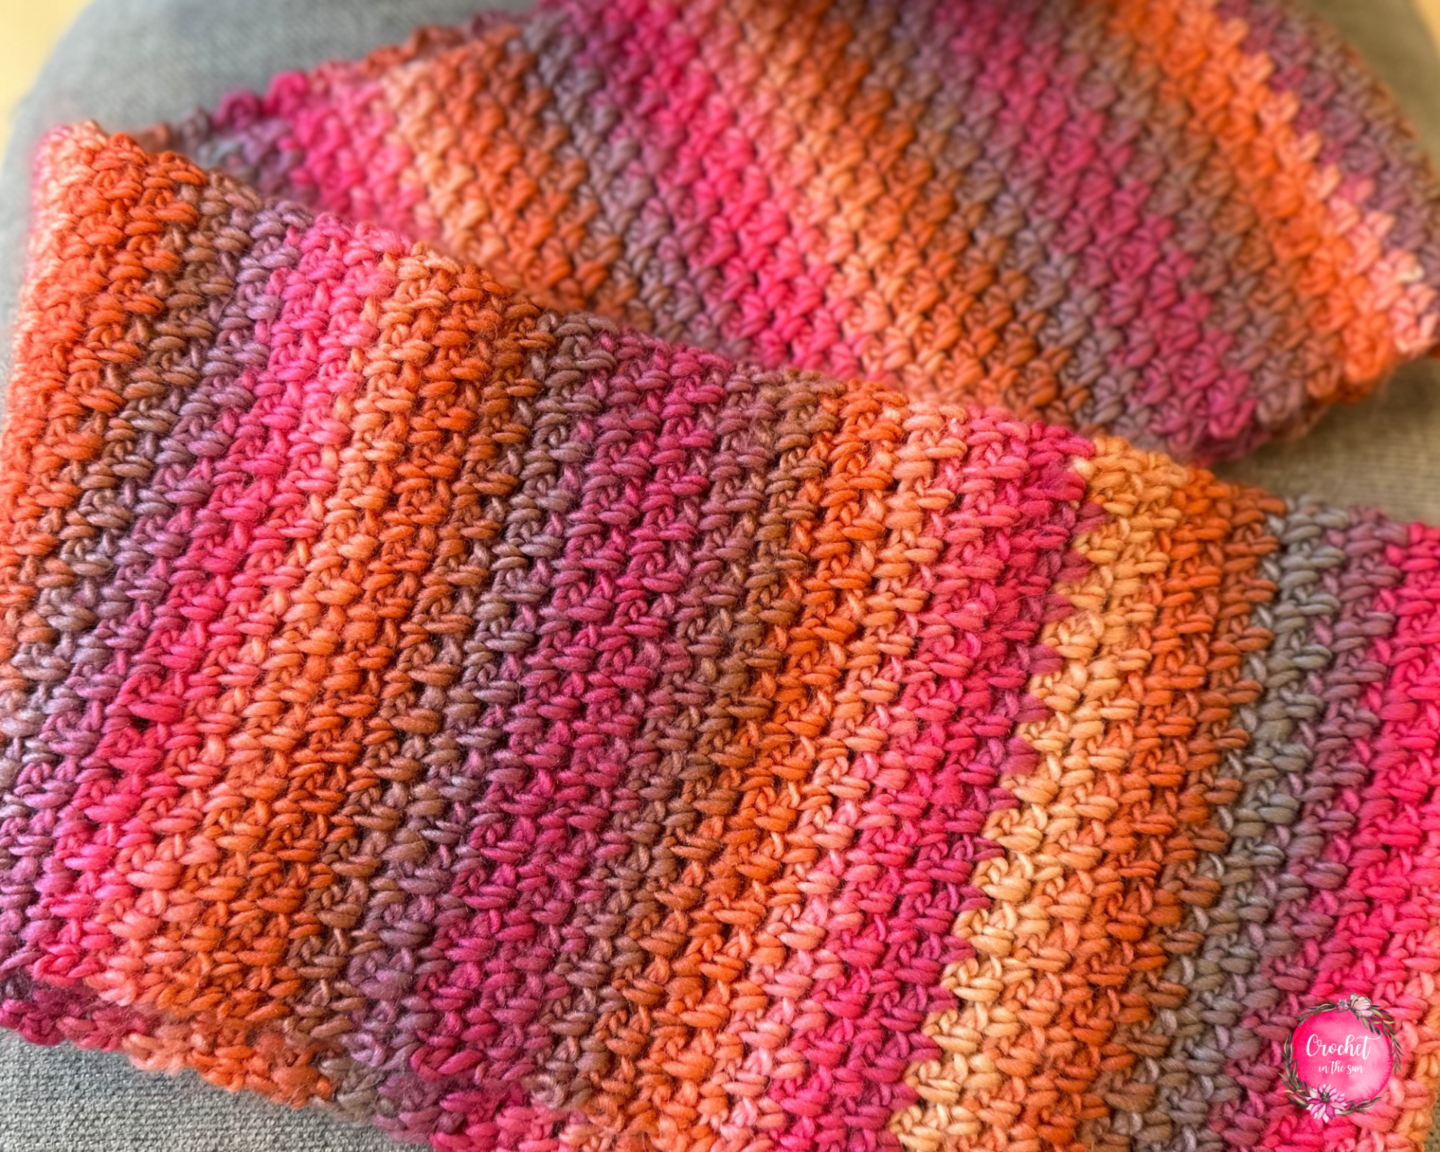 Crochet scarf idea! Learn how to crochet this colorful scarf! This is a free crochet scarf pattern, easy & beginner friendly. Includes step by step photo tutorial